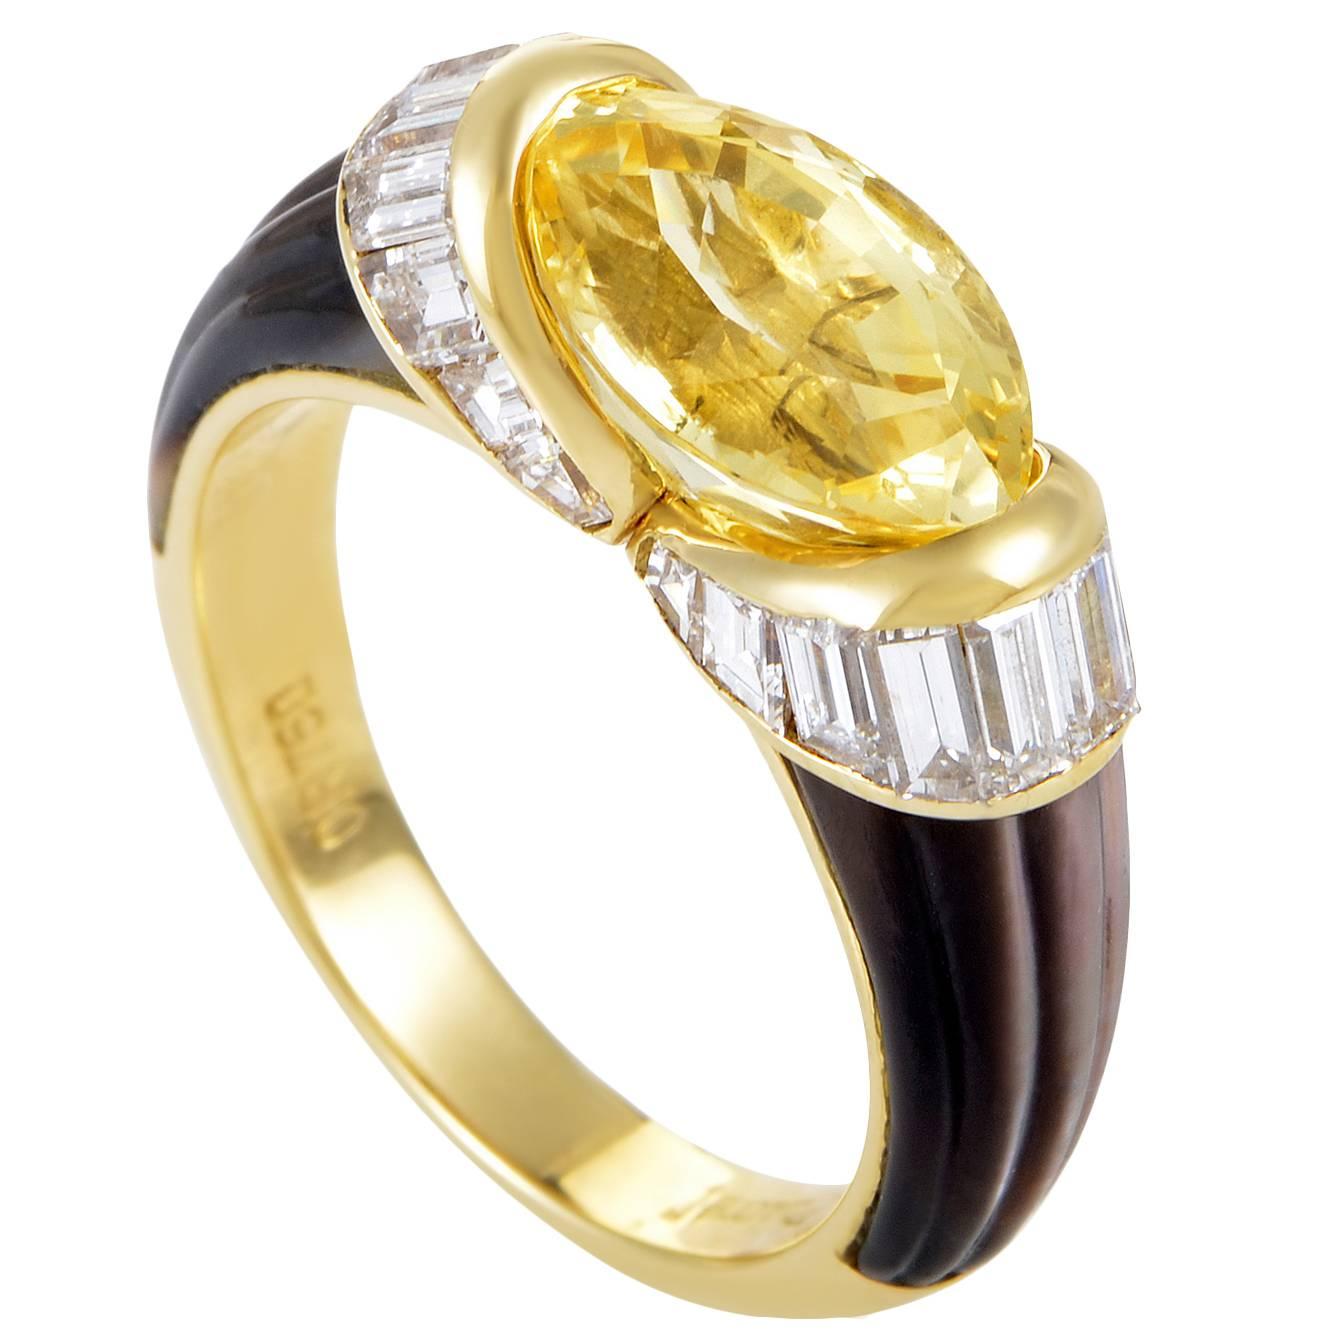 Piaget Mother of Pearl Yellow Sapphire Diamond Gold Ring